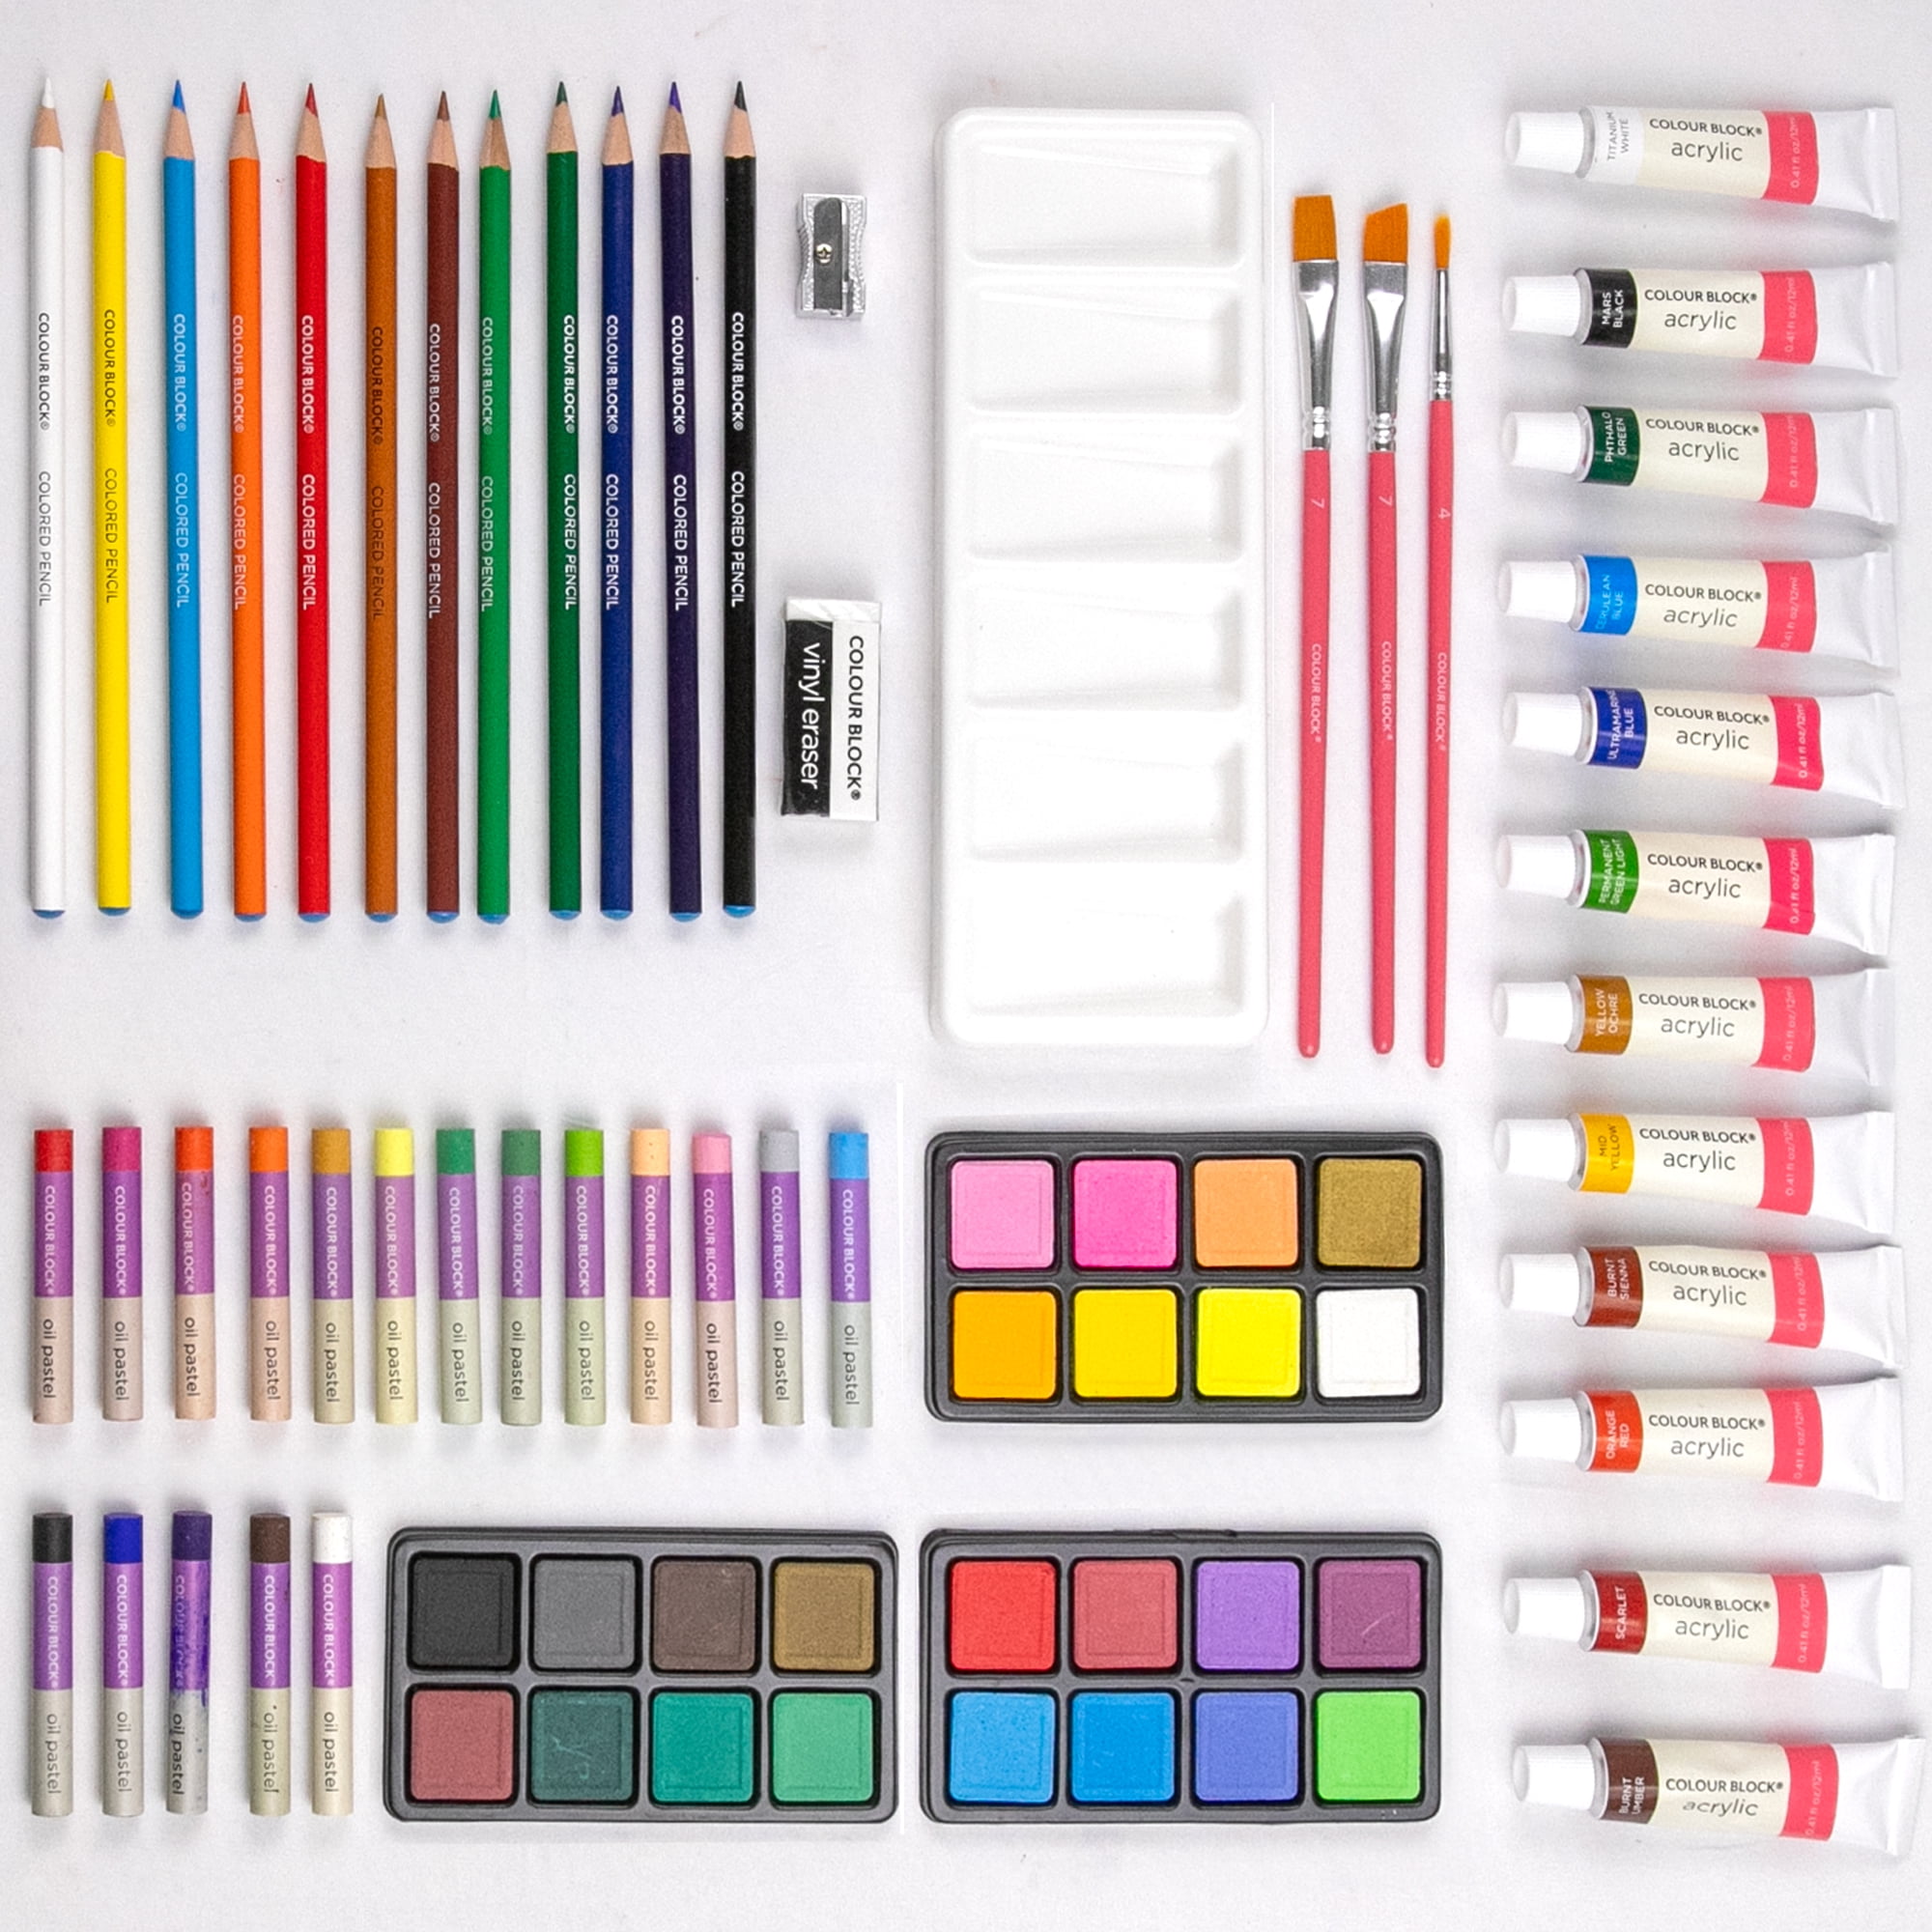  COLOUR BLOCK 73 Piece Art Set - Premium Art Supplies Kit for  Adults & Kids, Painting and Drawing Art Kits for Teens and Children, Ideal  for Artists Ages 8-12 & 9-12